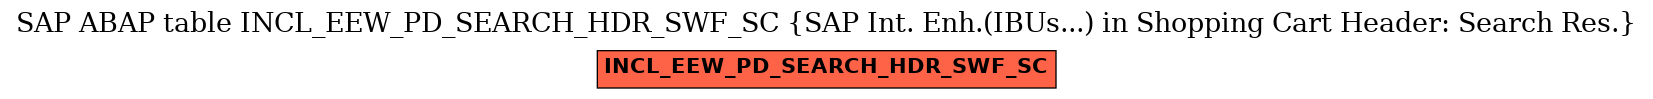 E-R Diagram for table INCL_EEW_PD_SEARCH_HDR_SWF_SC (SAP Int. Enh.(IBUs...) in Shopping Cart Header: Search Res.)